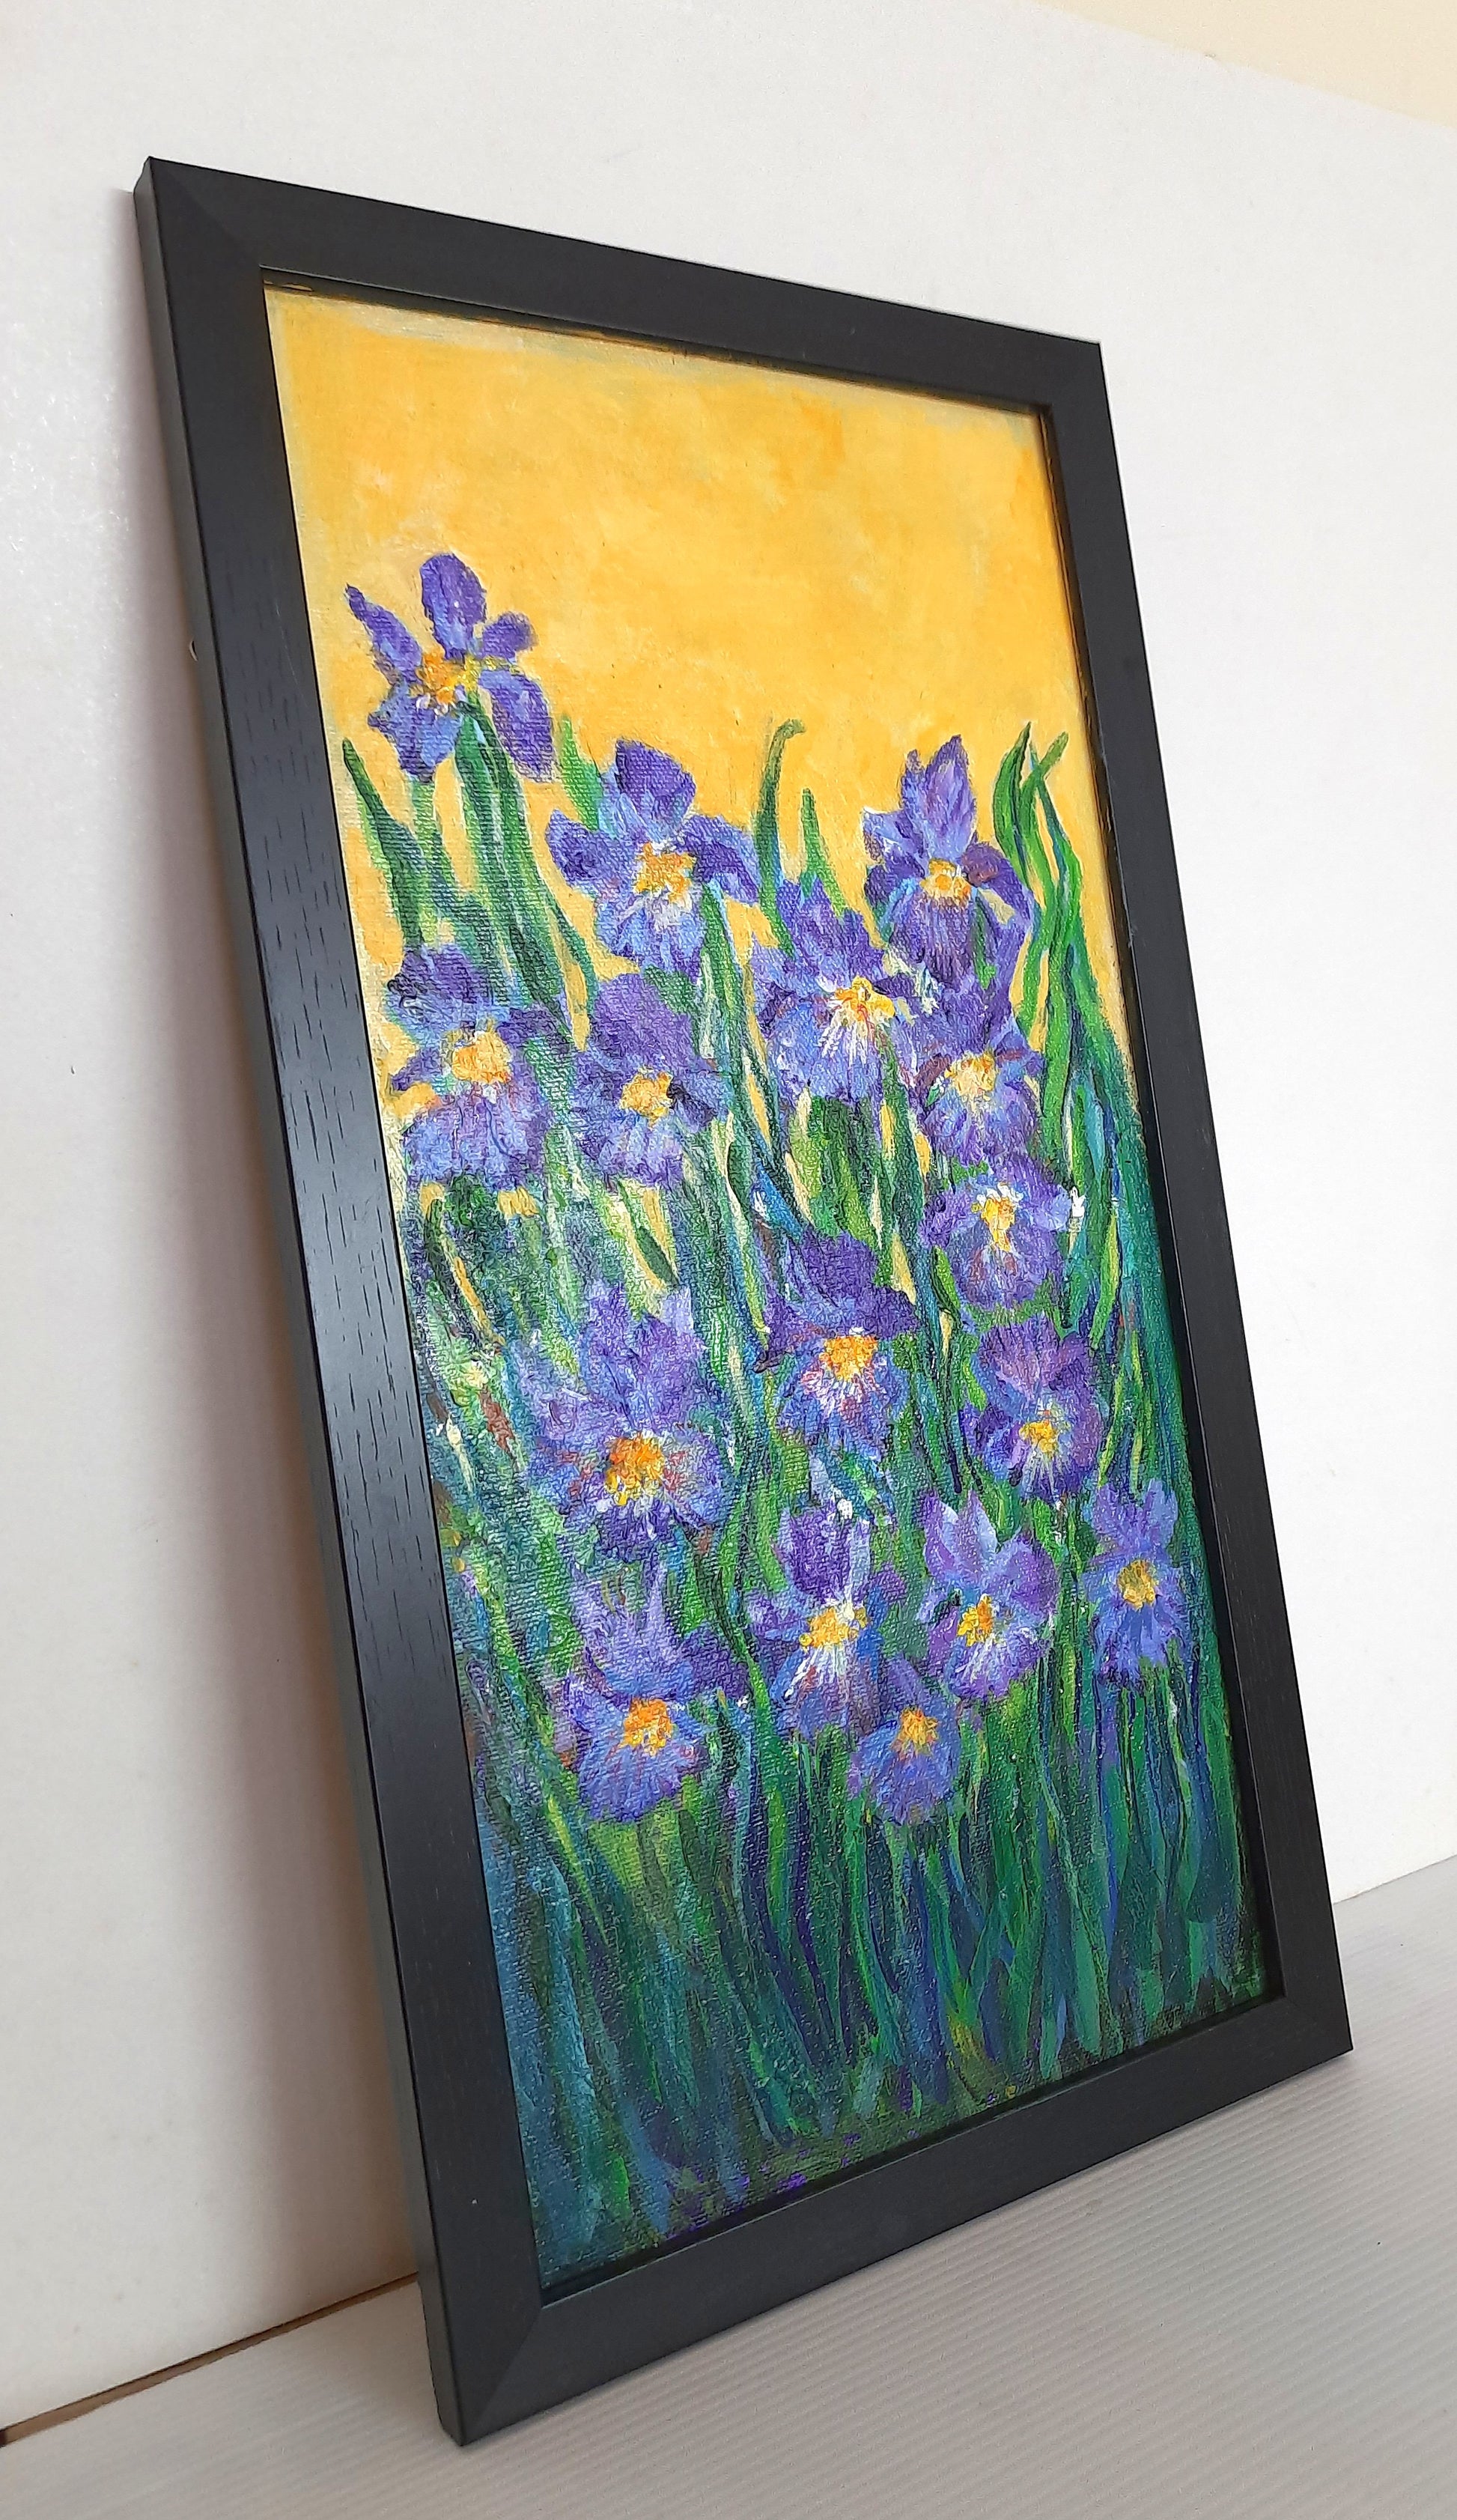 Framed view of Garden iris flowers, acrylic painting on canvas panel